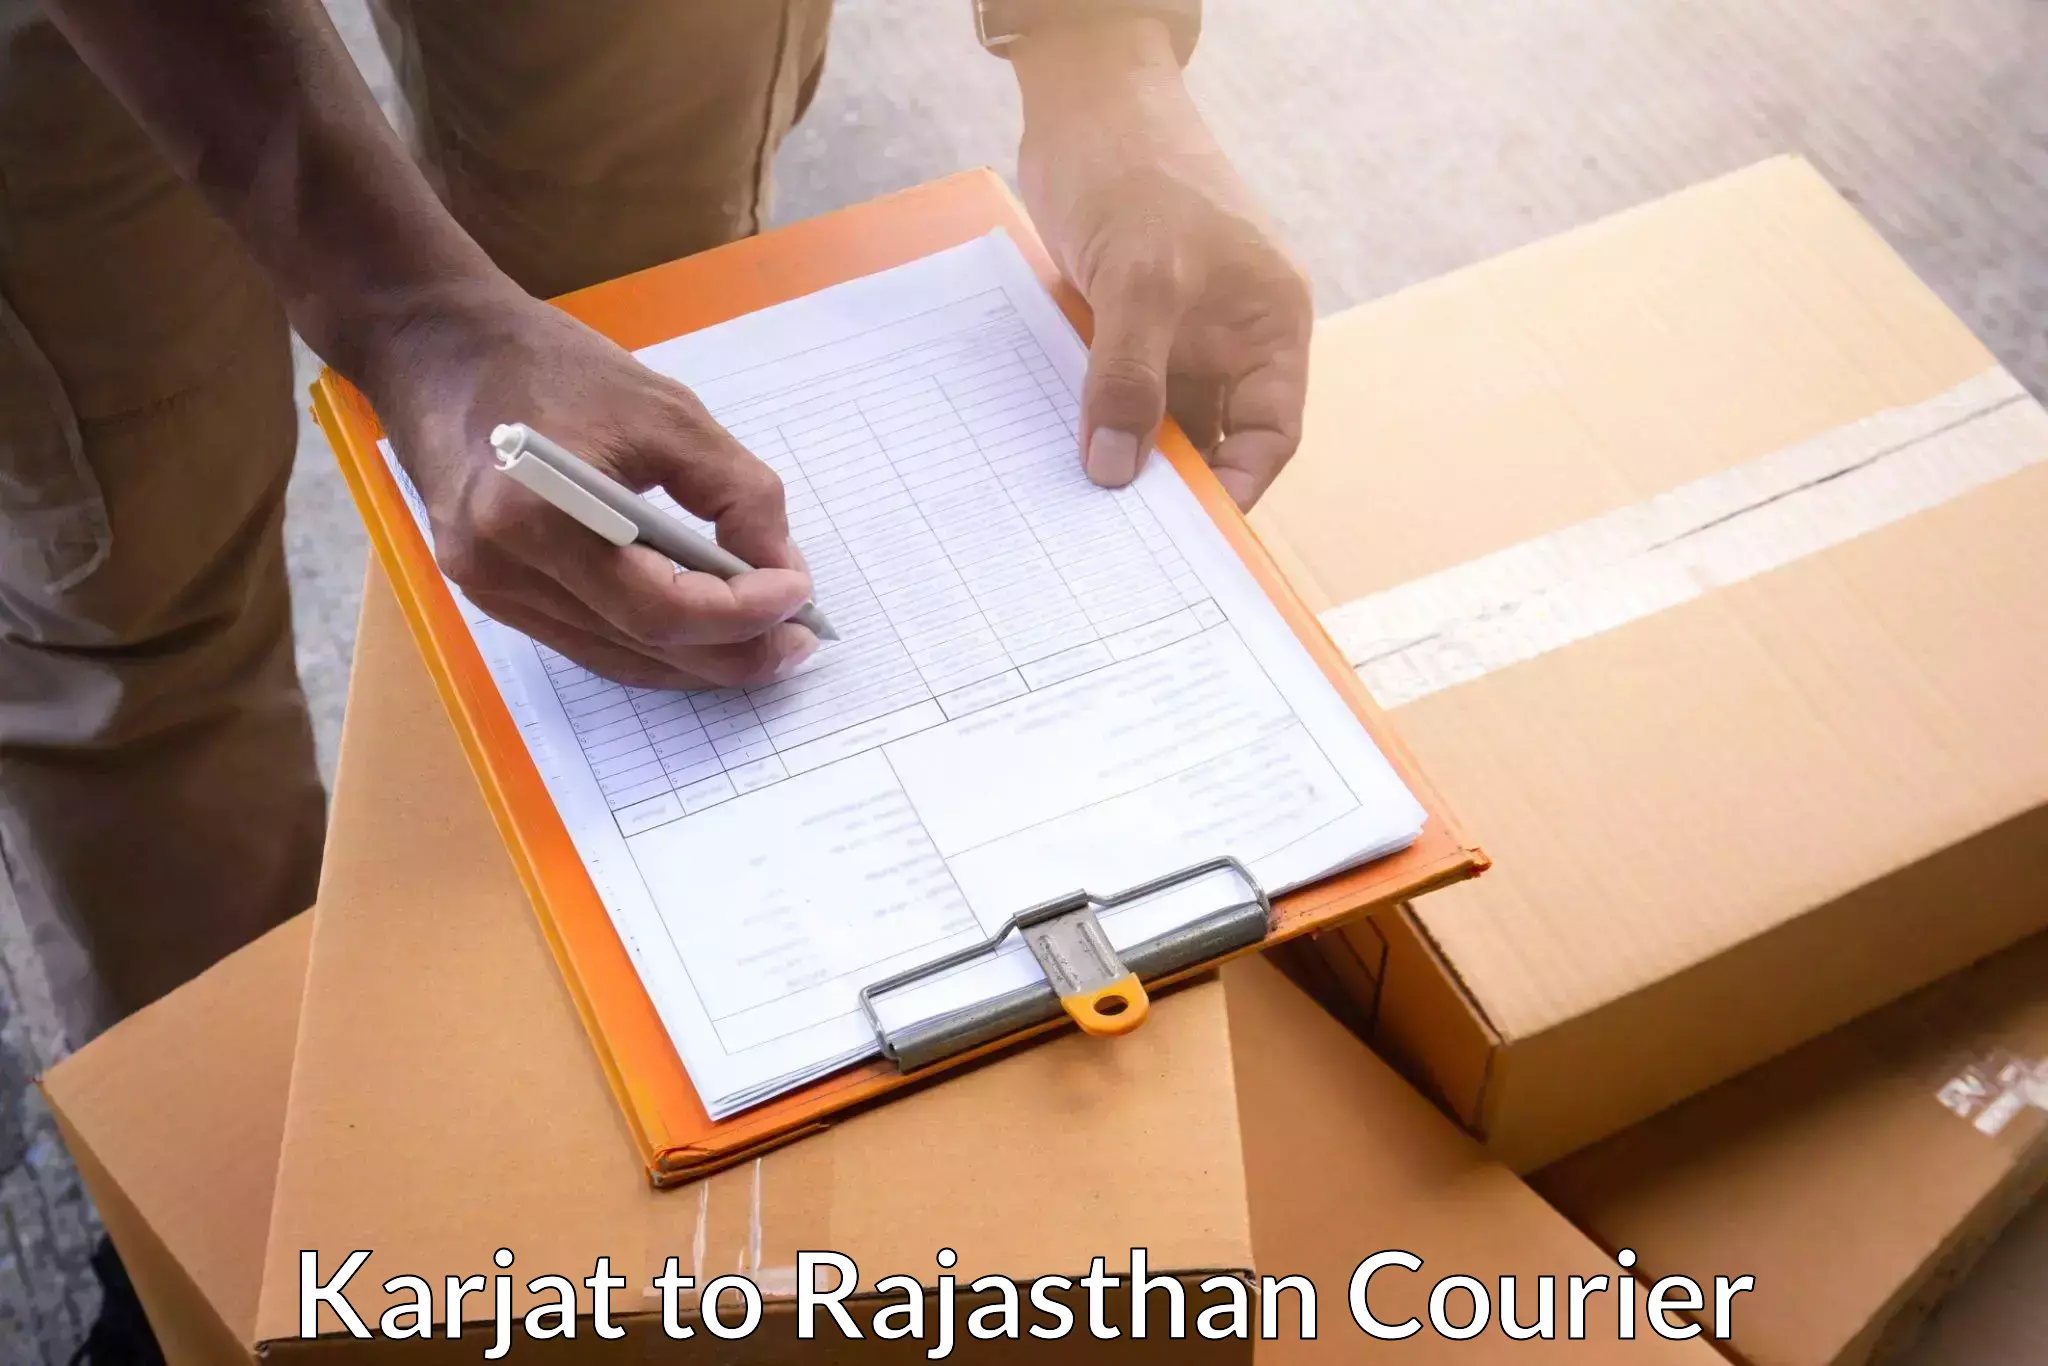 Seamless shipping experience Karjat to Khanpur